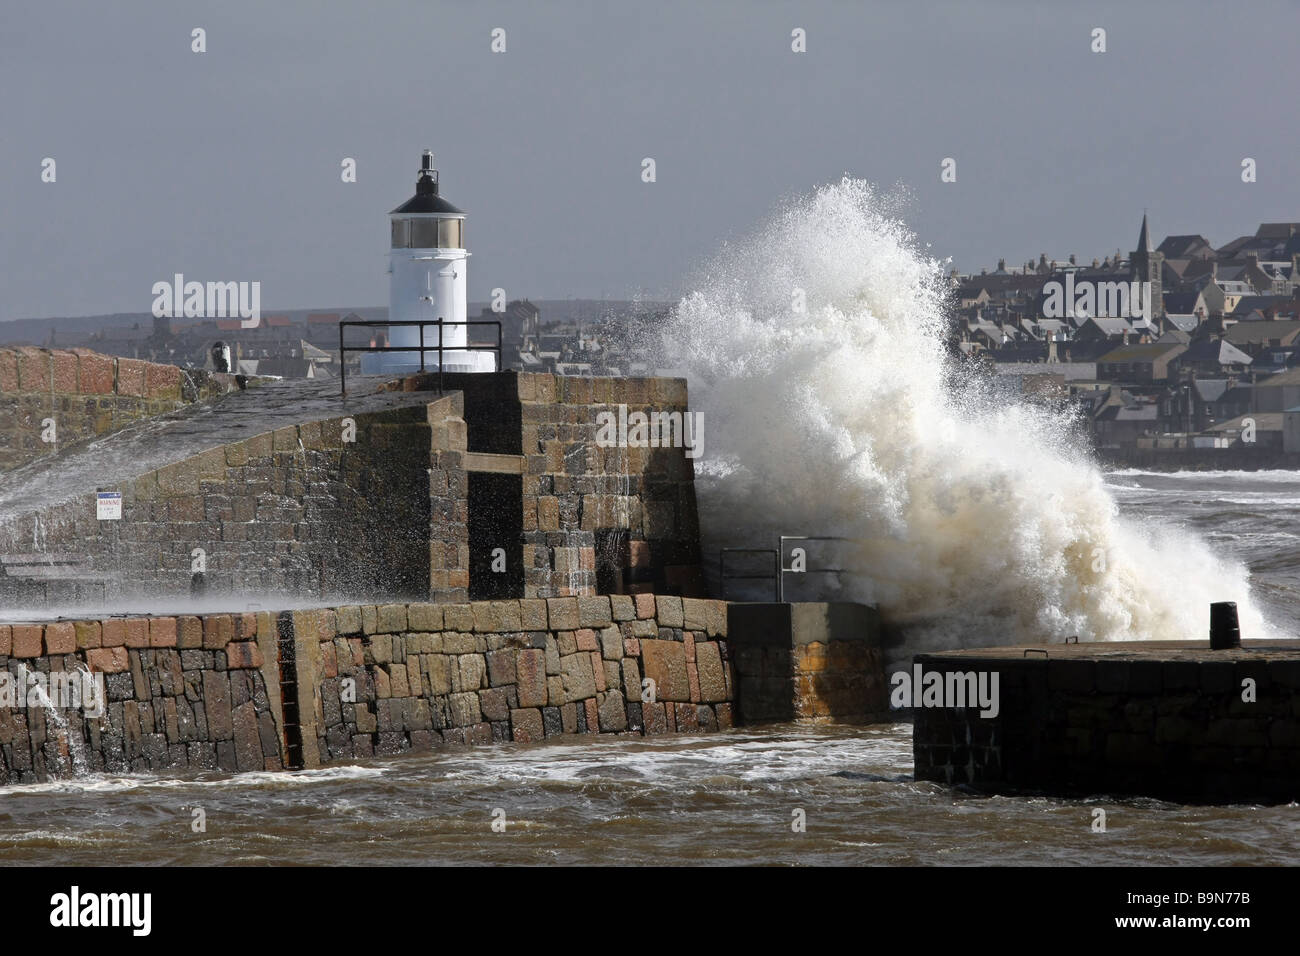 Waves break over the wall and lighthouse at the entrance of Banff Harbour, Scotland, UK. Town of Macduff is in the background Stock Photo